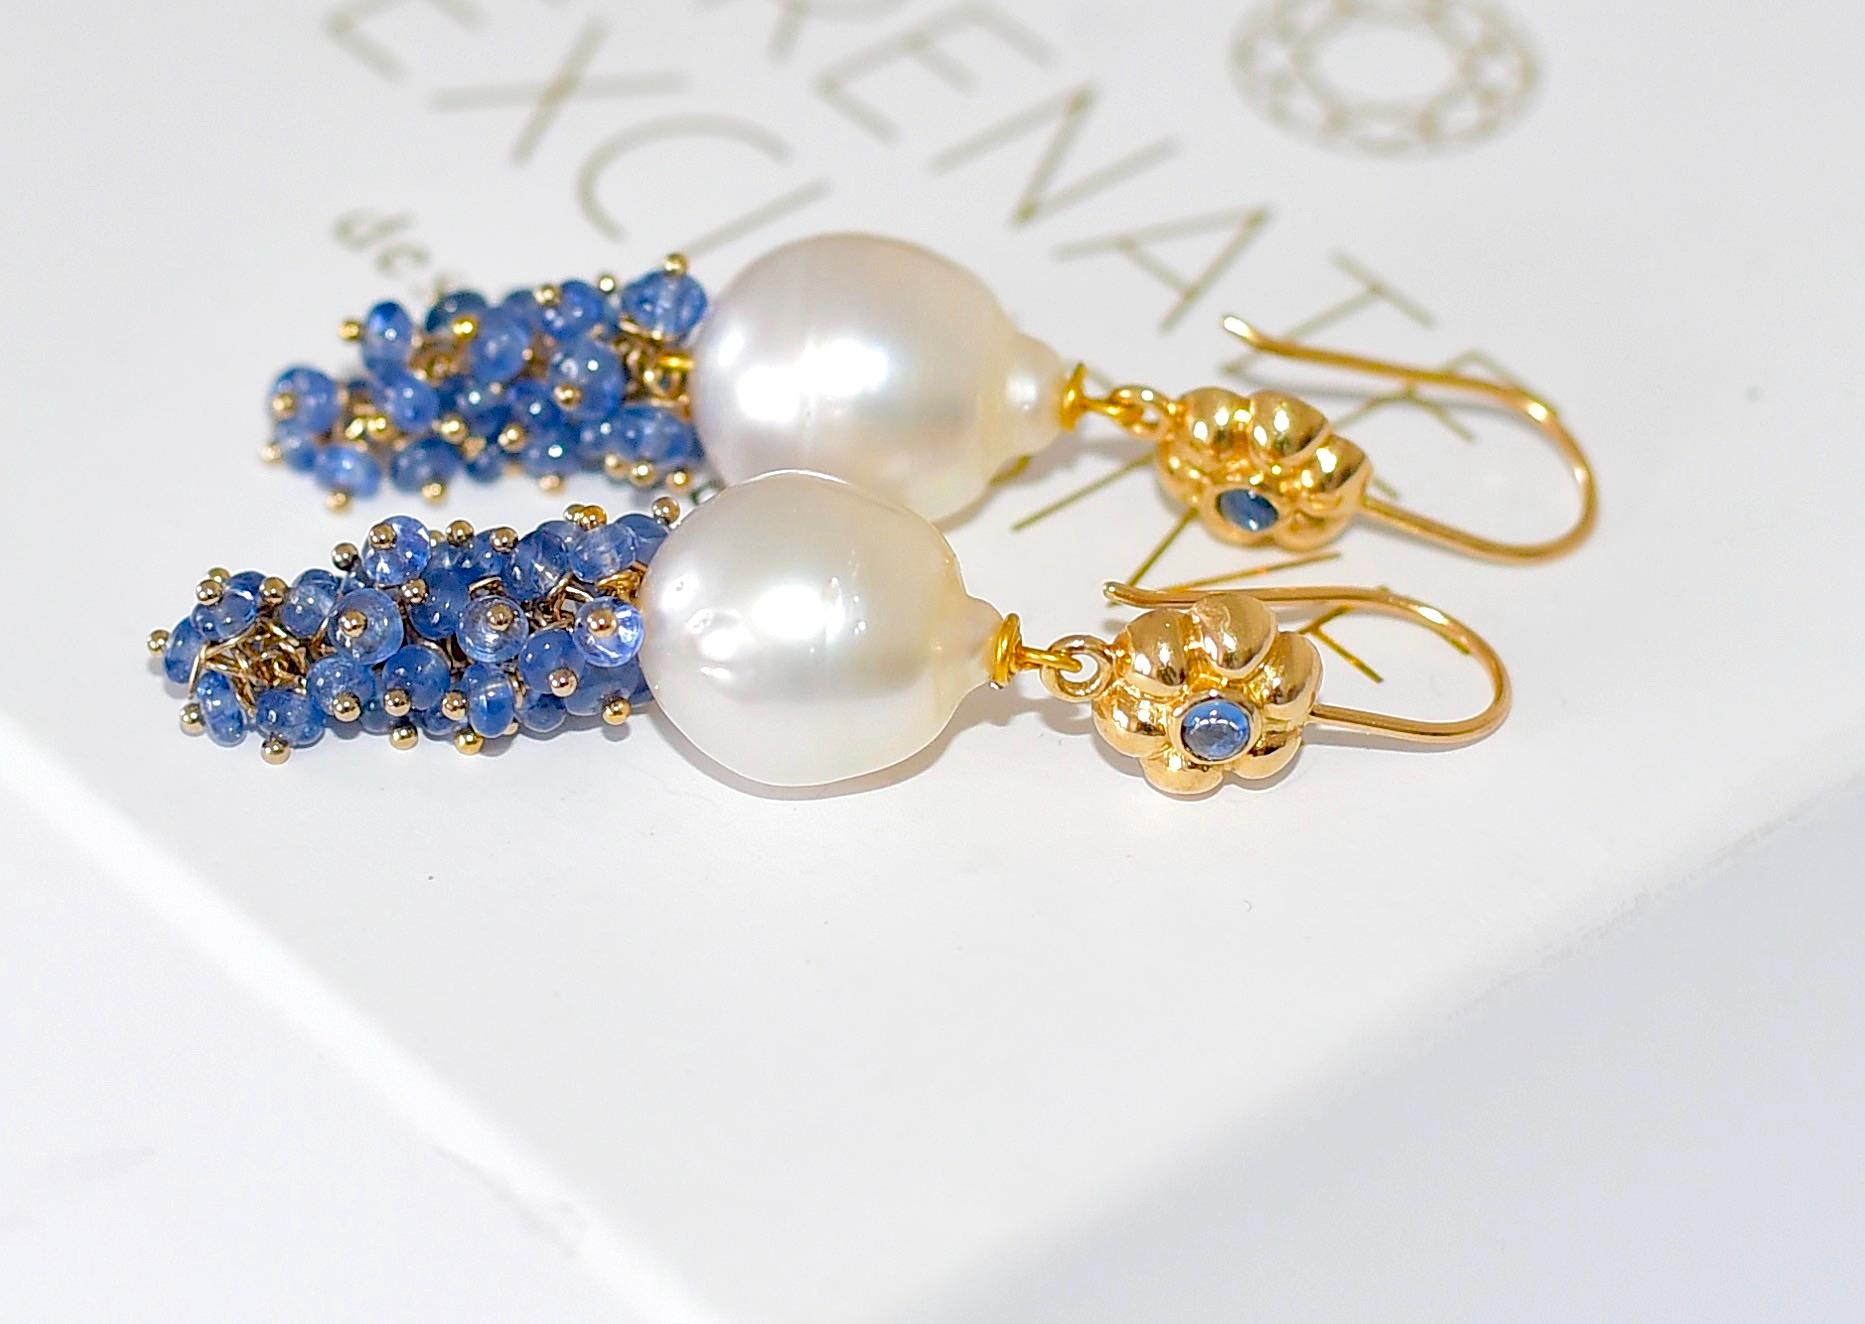 
A truly beautiful and luxurious pair of earrings for elegant days! Something for blue lovers!

Made of: No Heat, unheated, untreated Burmese Cornflower Natural Blue Sapphire Smooth Rondelle Beads, 3-4mm
White South Sea Cultured Baroque Pearl; 13.3